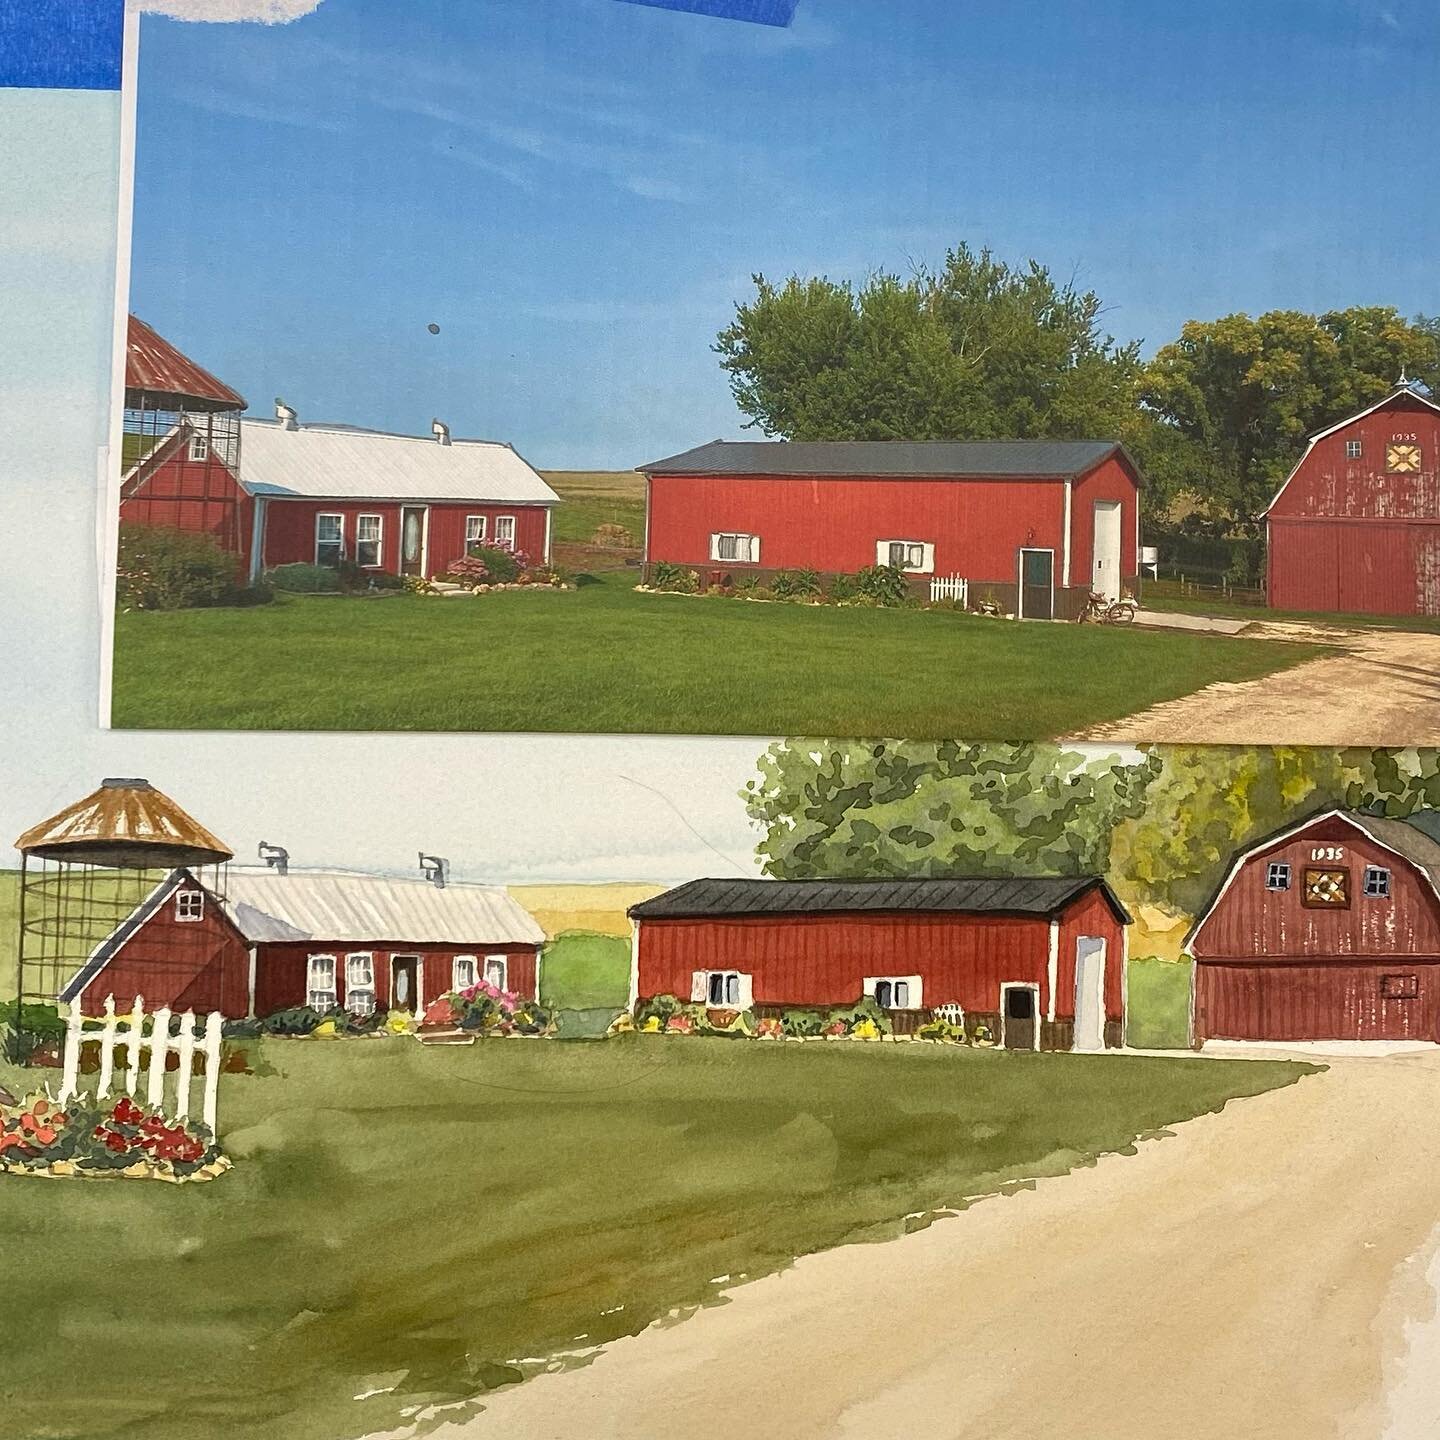 Work in progress. 
Just a little more to do before I complete this painting of the prettiest farmstead in Iowa. 🥰